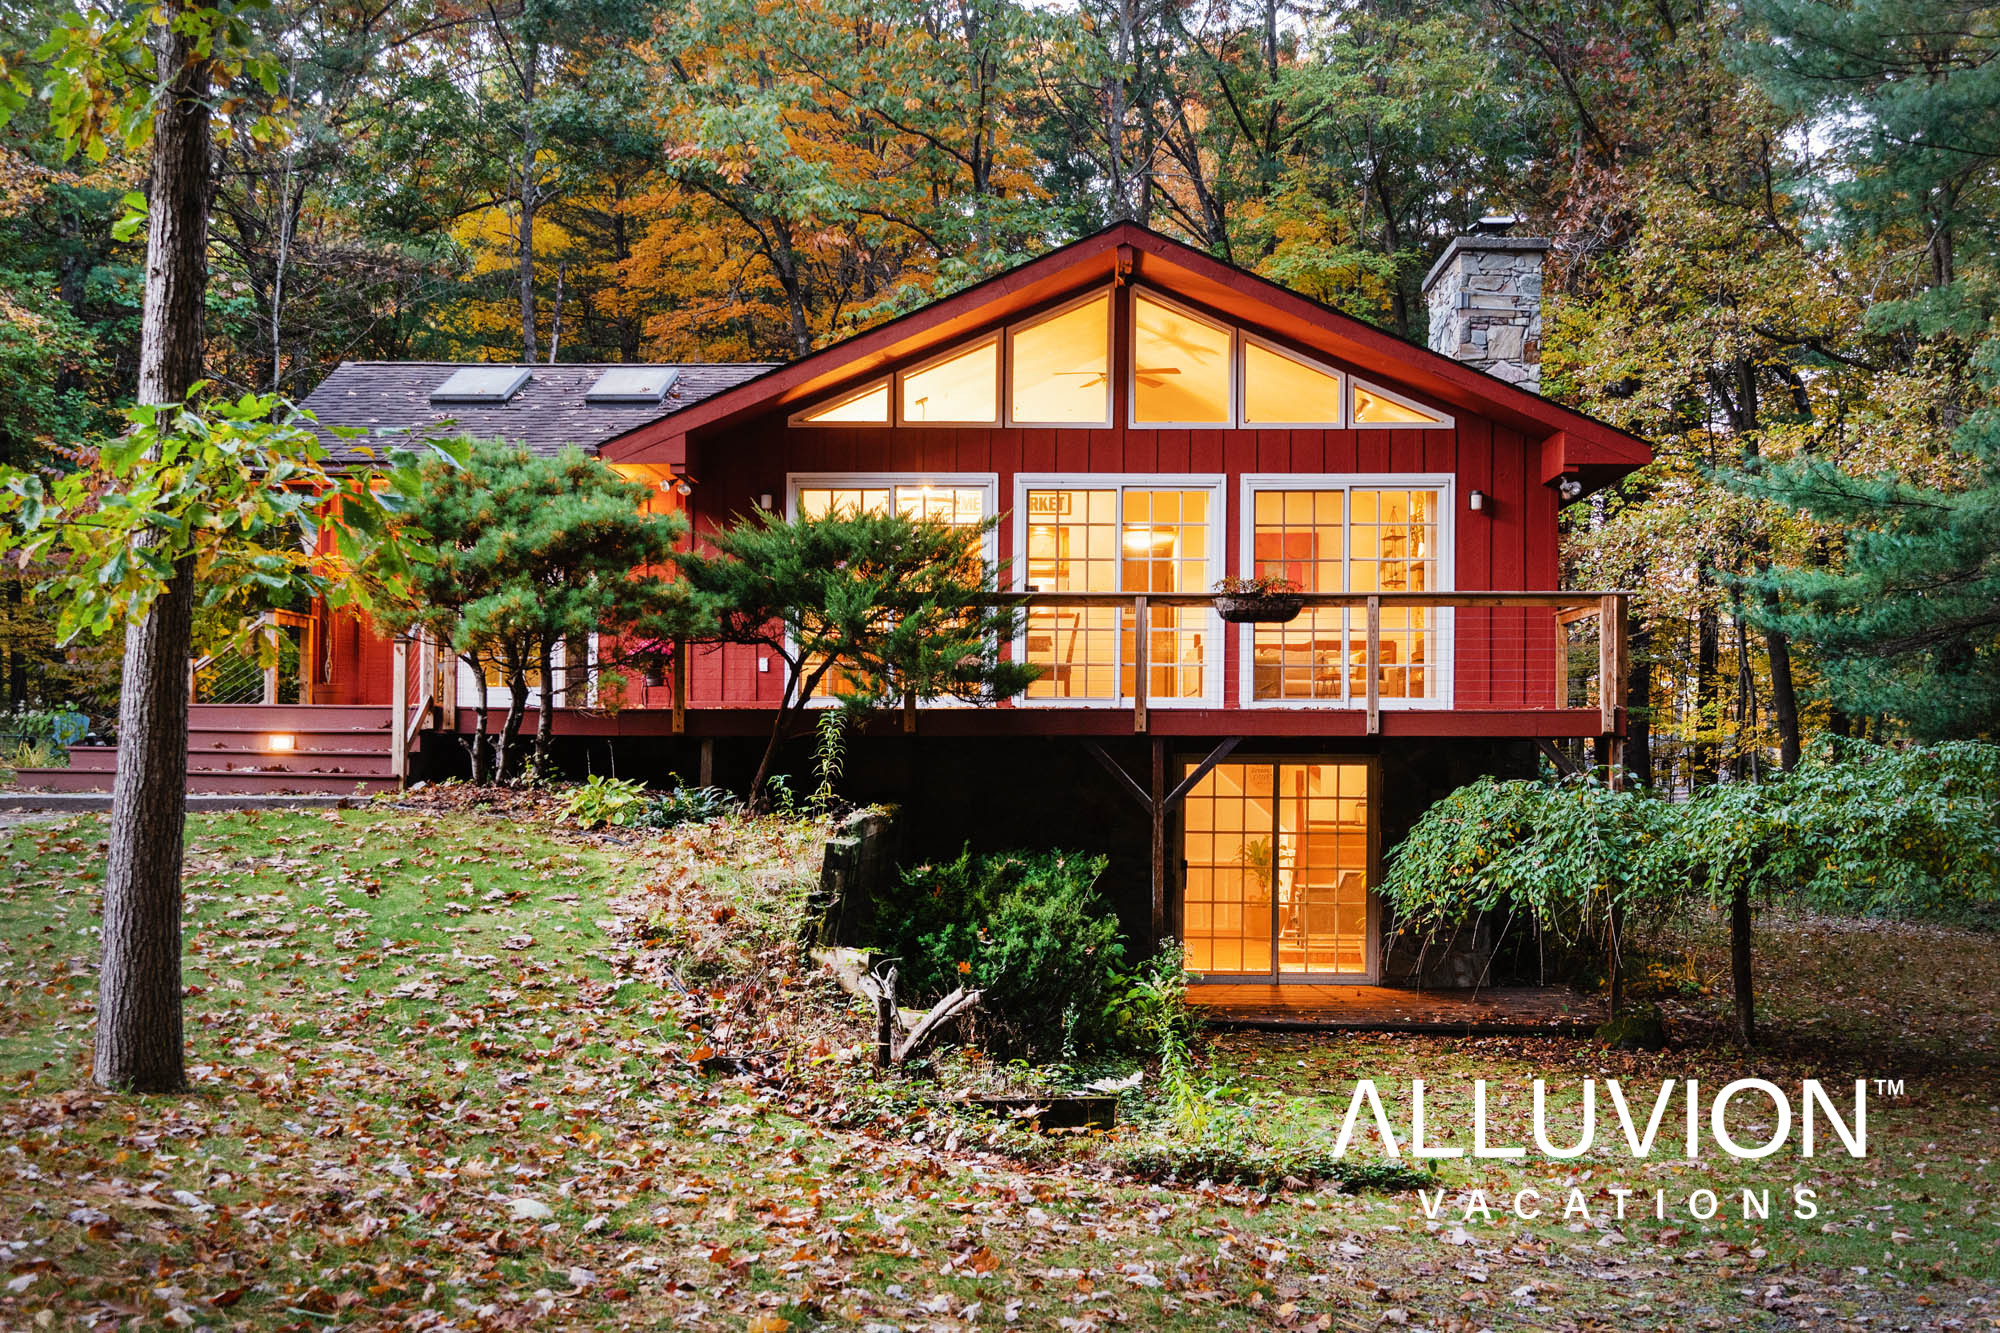 Dive into the heart of nature with exclusive Airbnbs in the Hudson Valley, handpicked by Alluvion Vacations for your spring season escape.